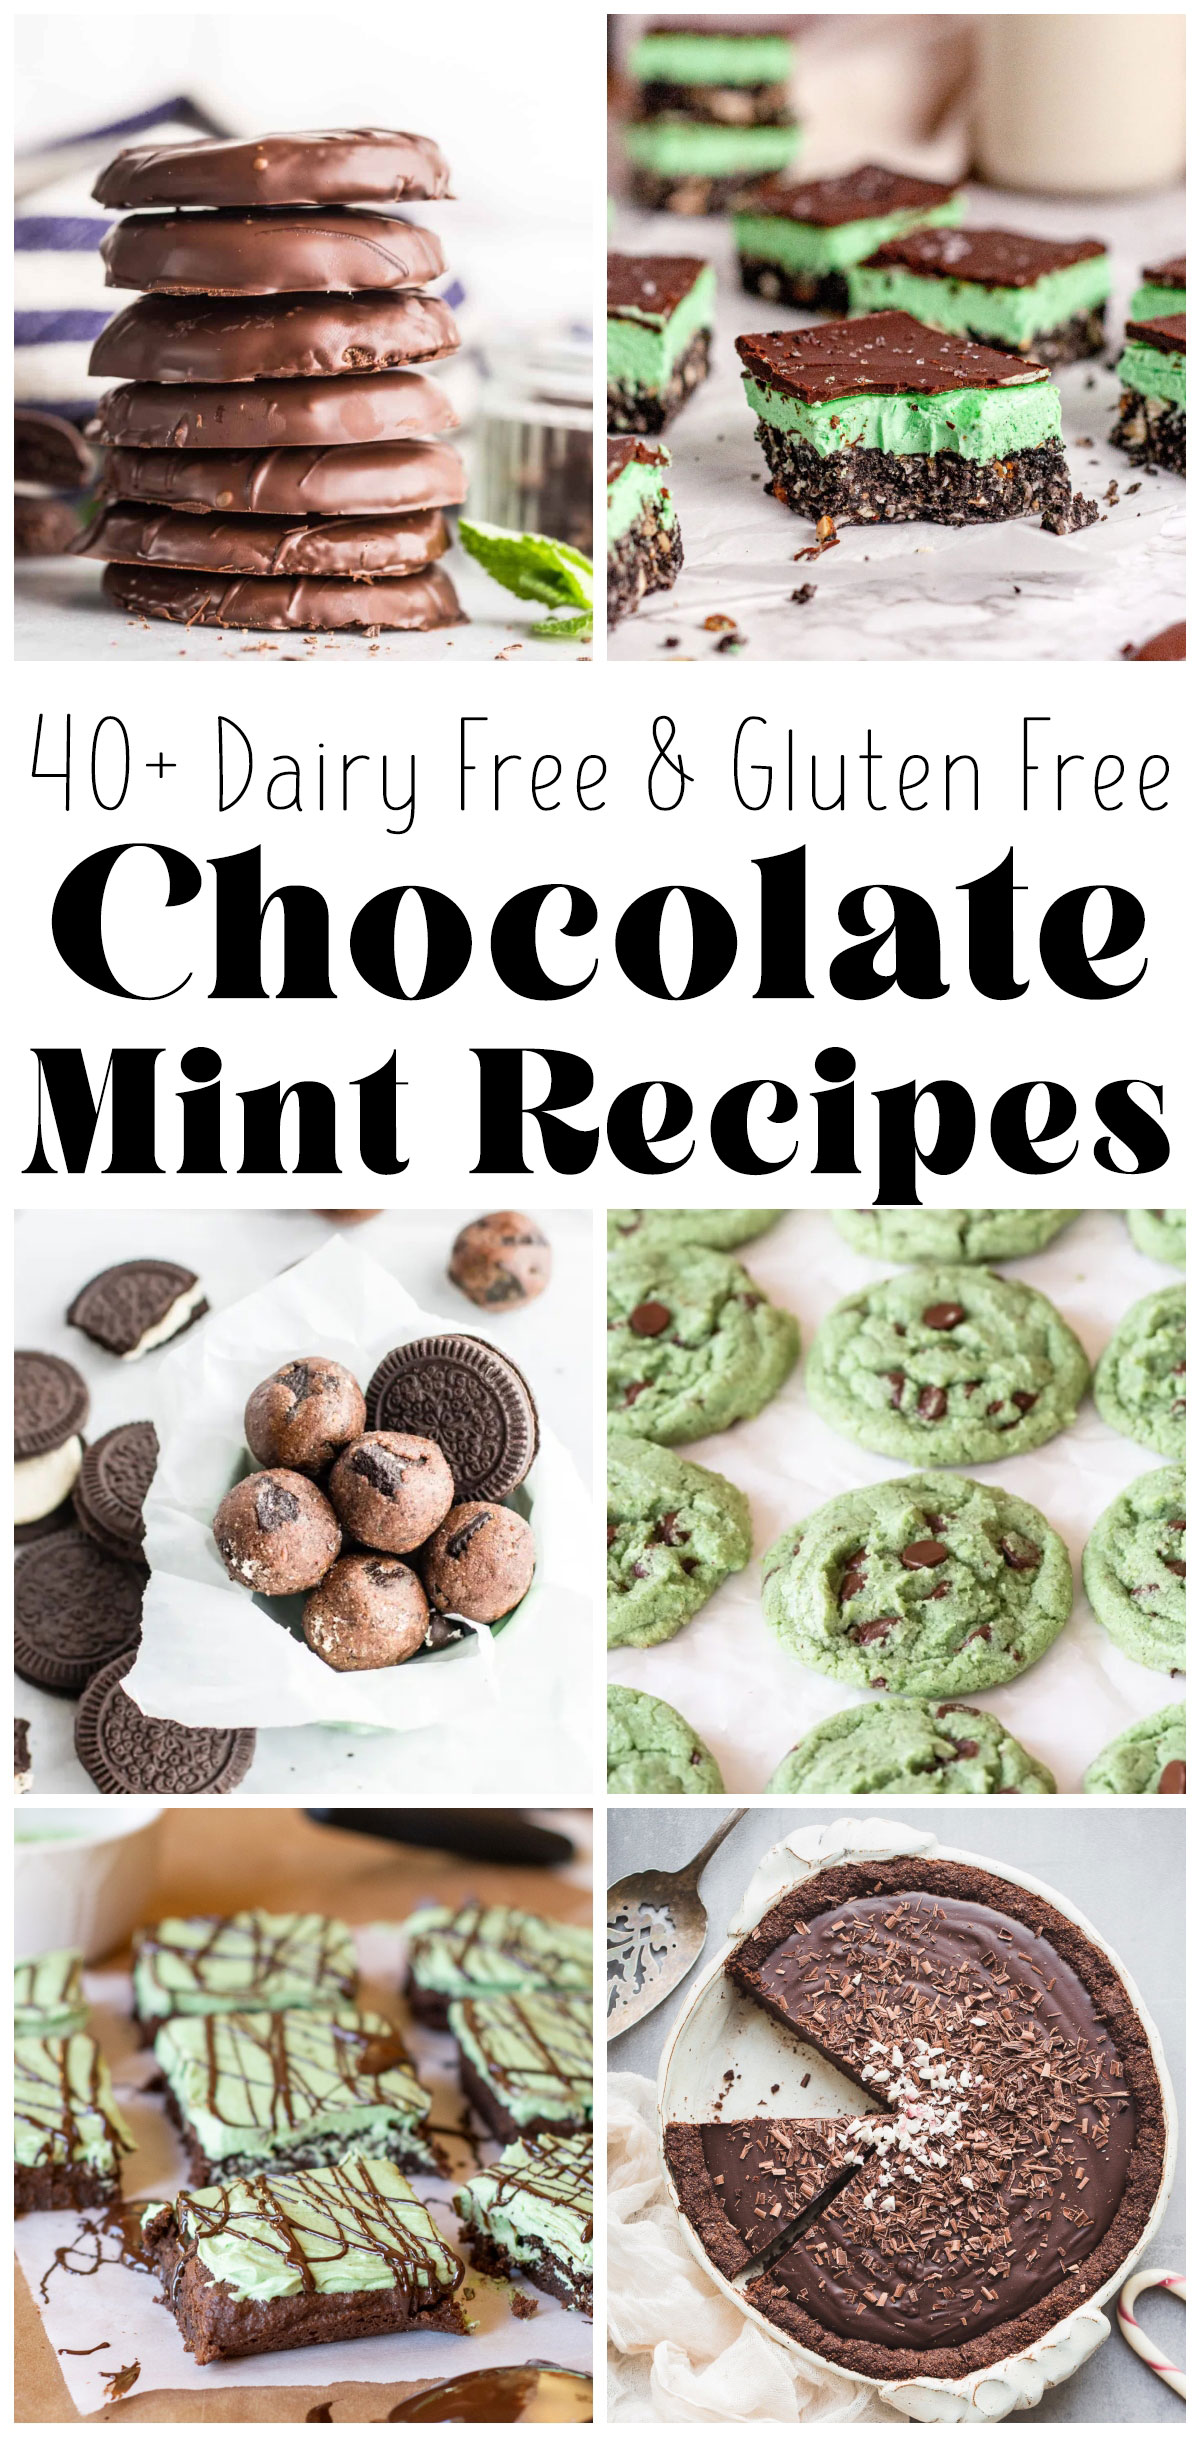 photo collage showing different chocolate mint recipes with text overlay that says "40+ dairy free and gluten free chocolate mint recipes".